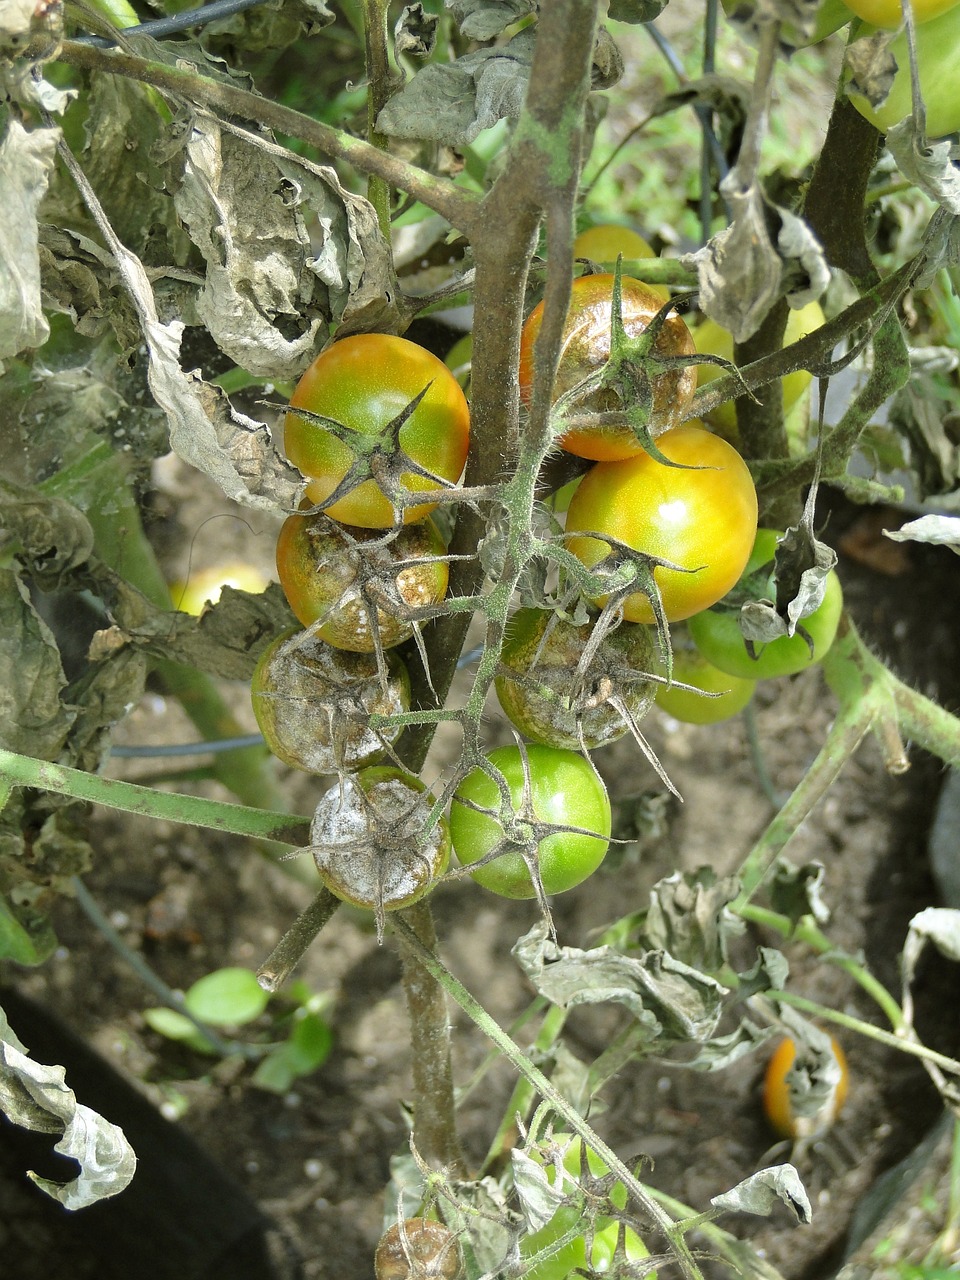 Are Your Tomatoes or Potatoes Suffering Disease After Recent Heavy Rainfalls?